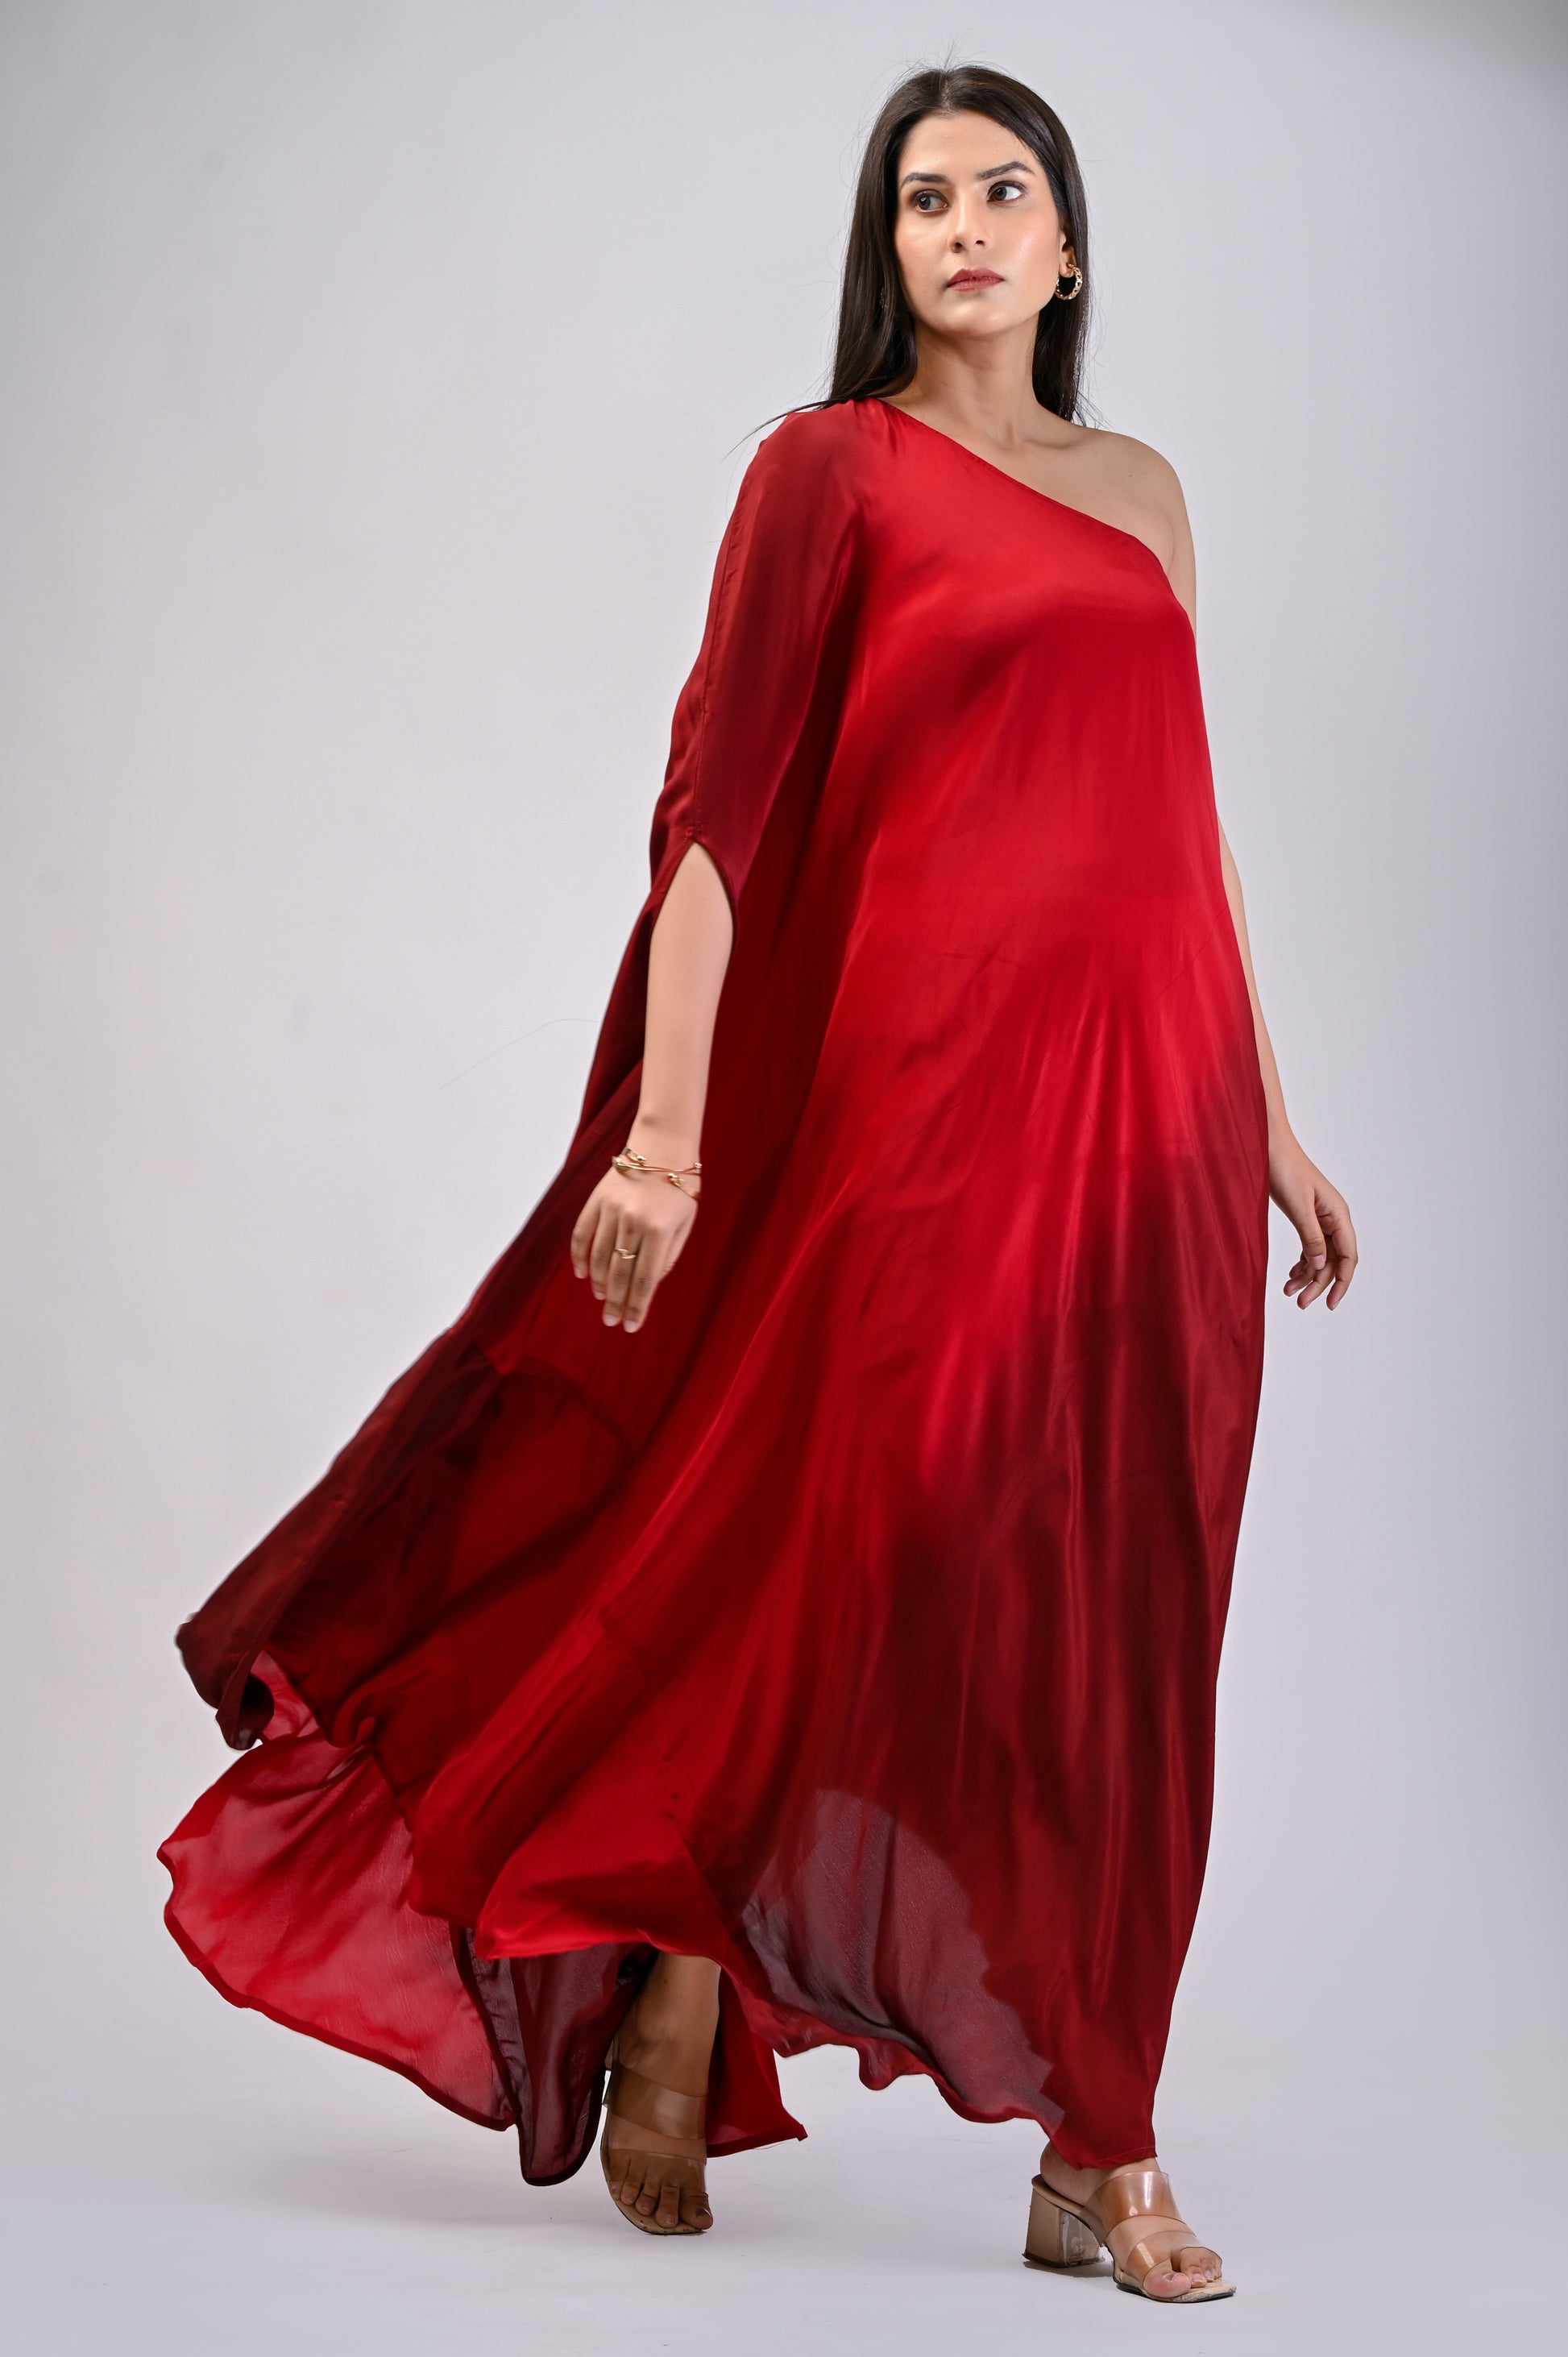 Buy Red Satin One Shoulder Dress With Floral Print And A Belt To Cinch The  Drape